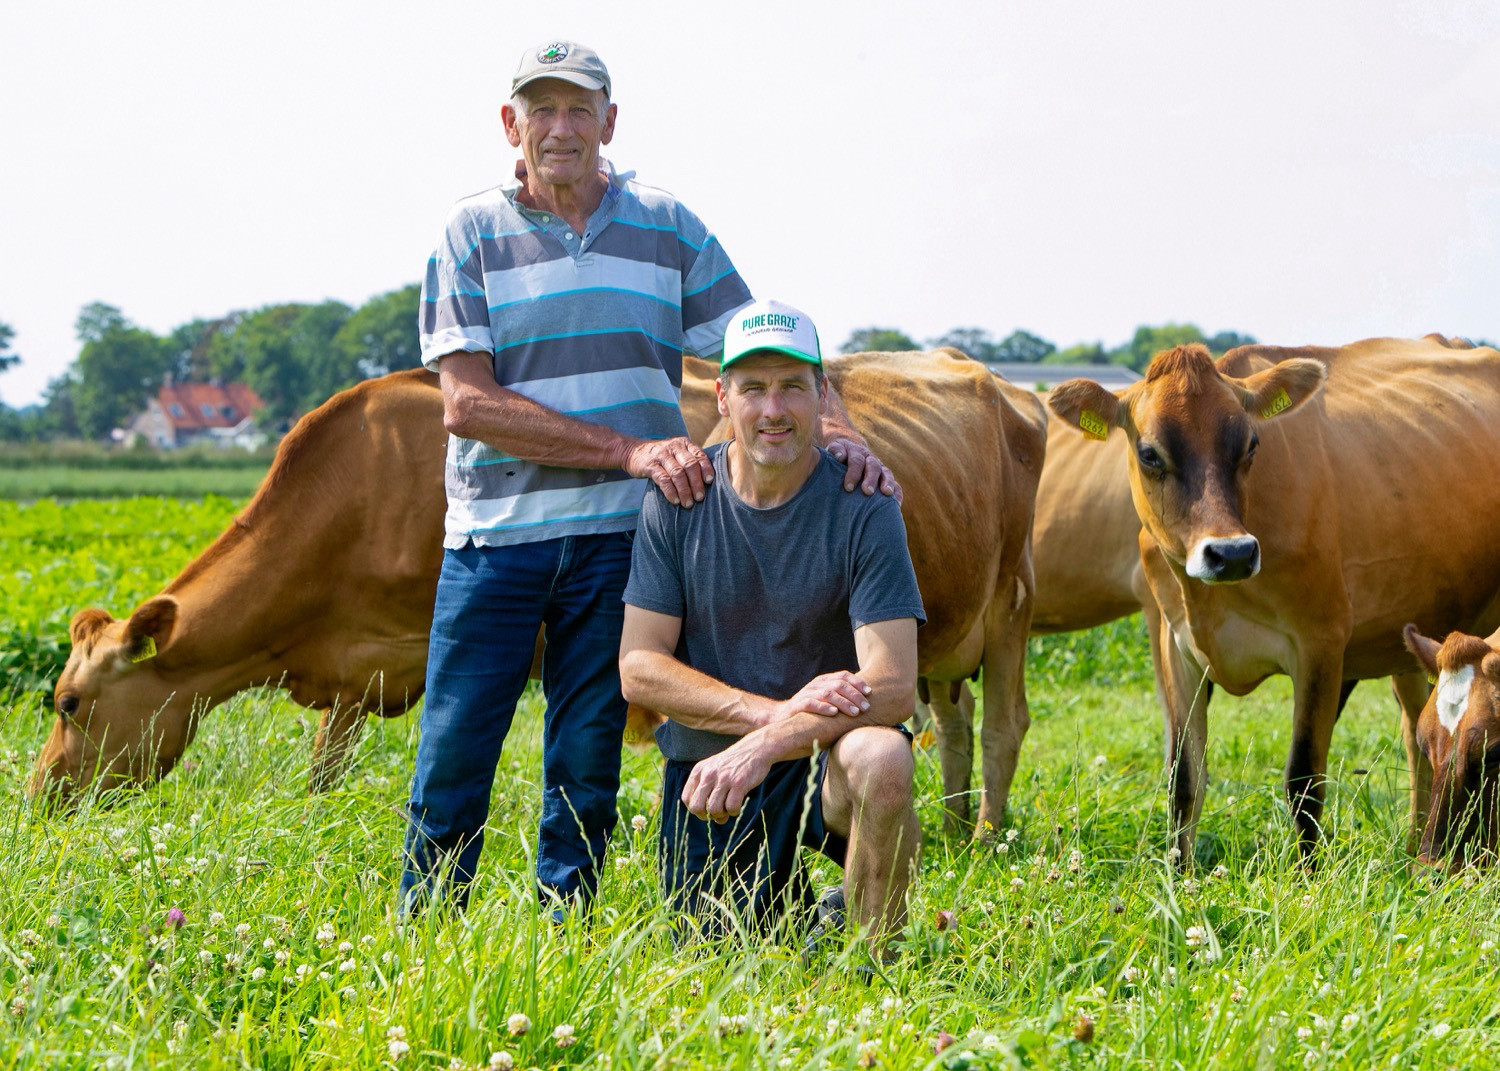 Dairy farmers Albert and son Jelle Hakvoort with their cross-bred cows.